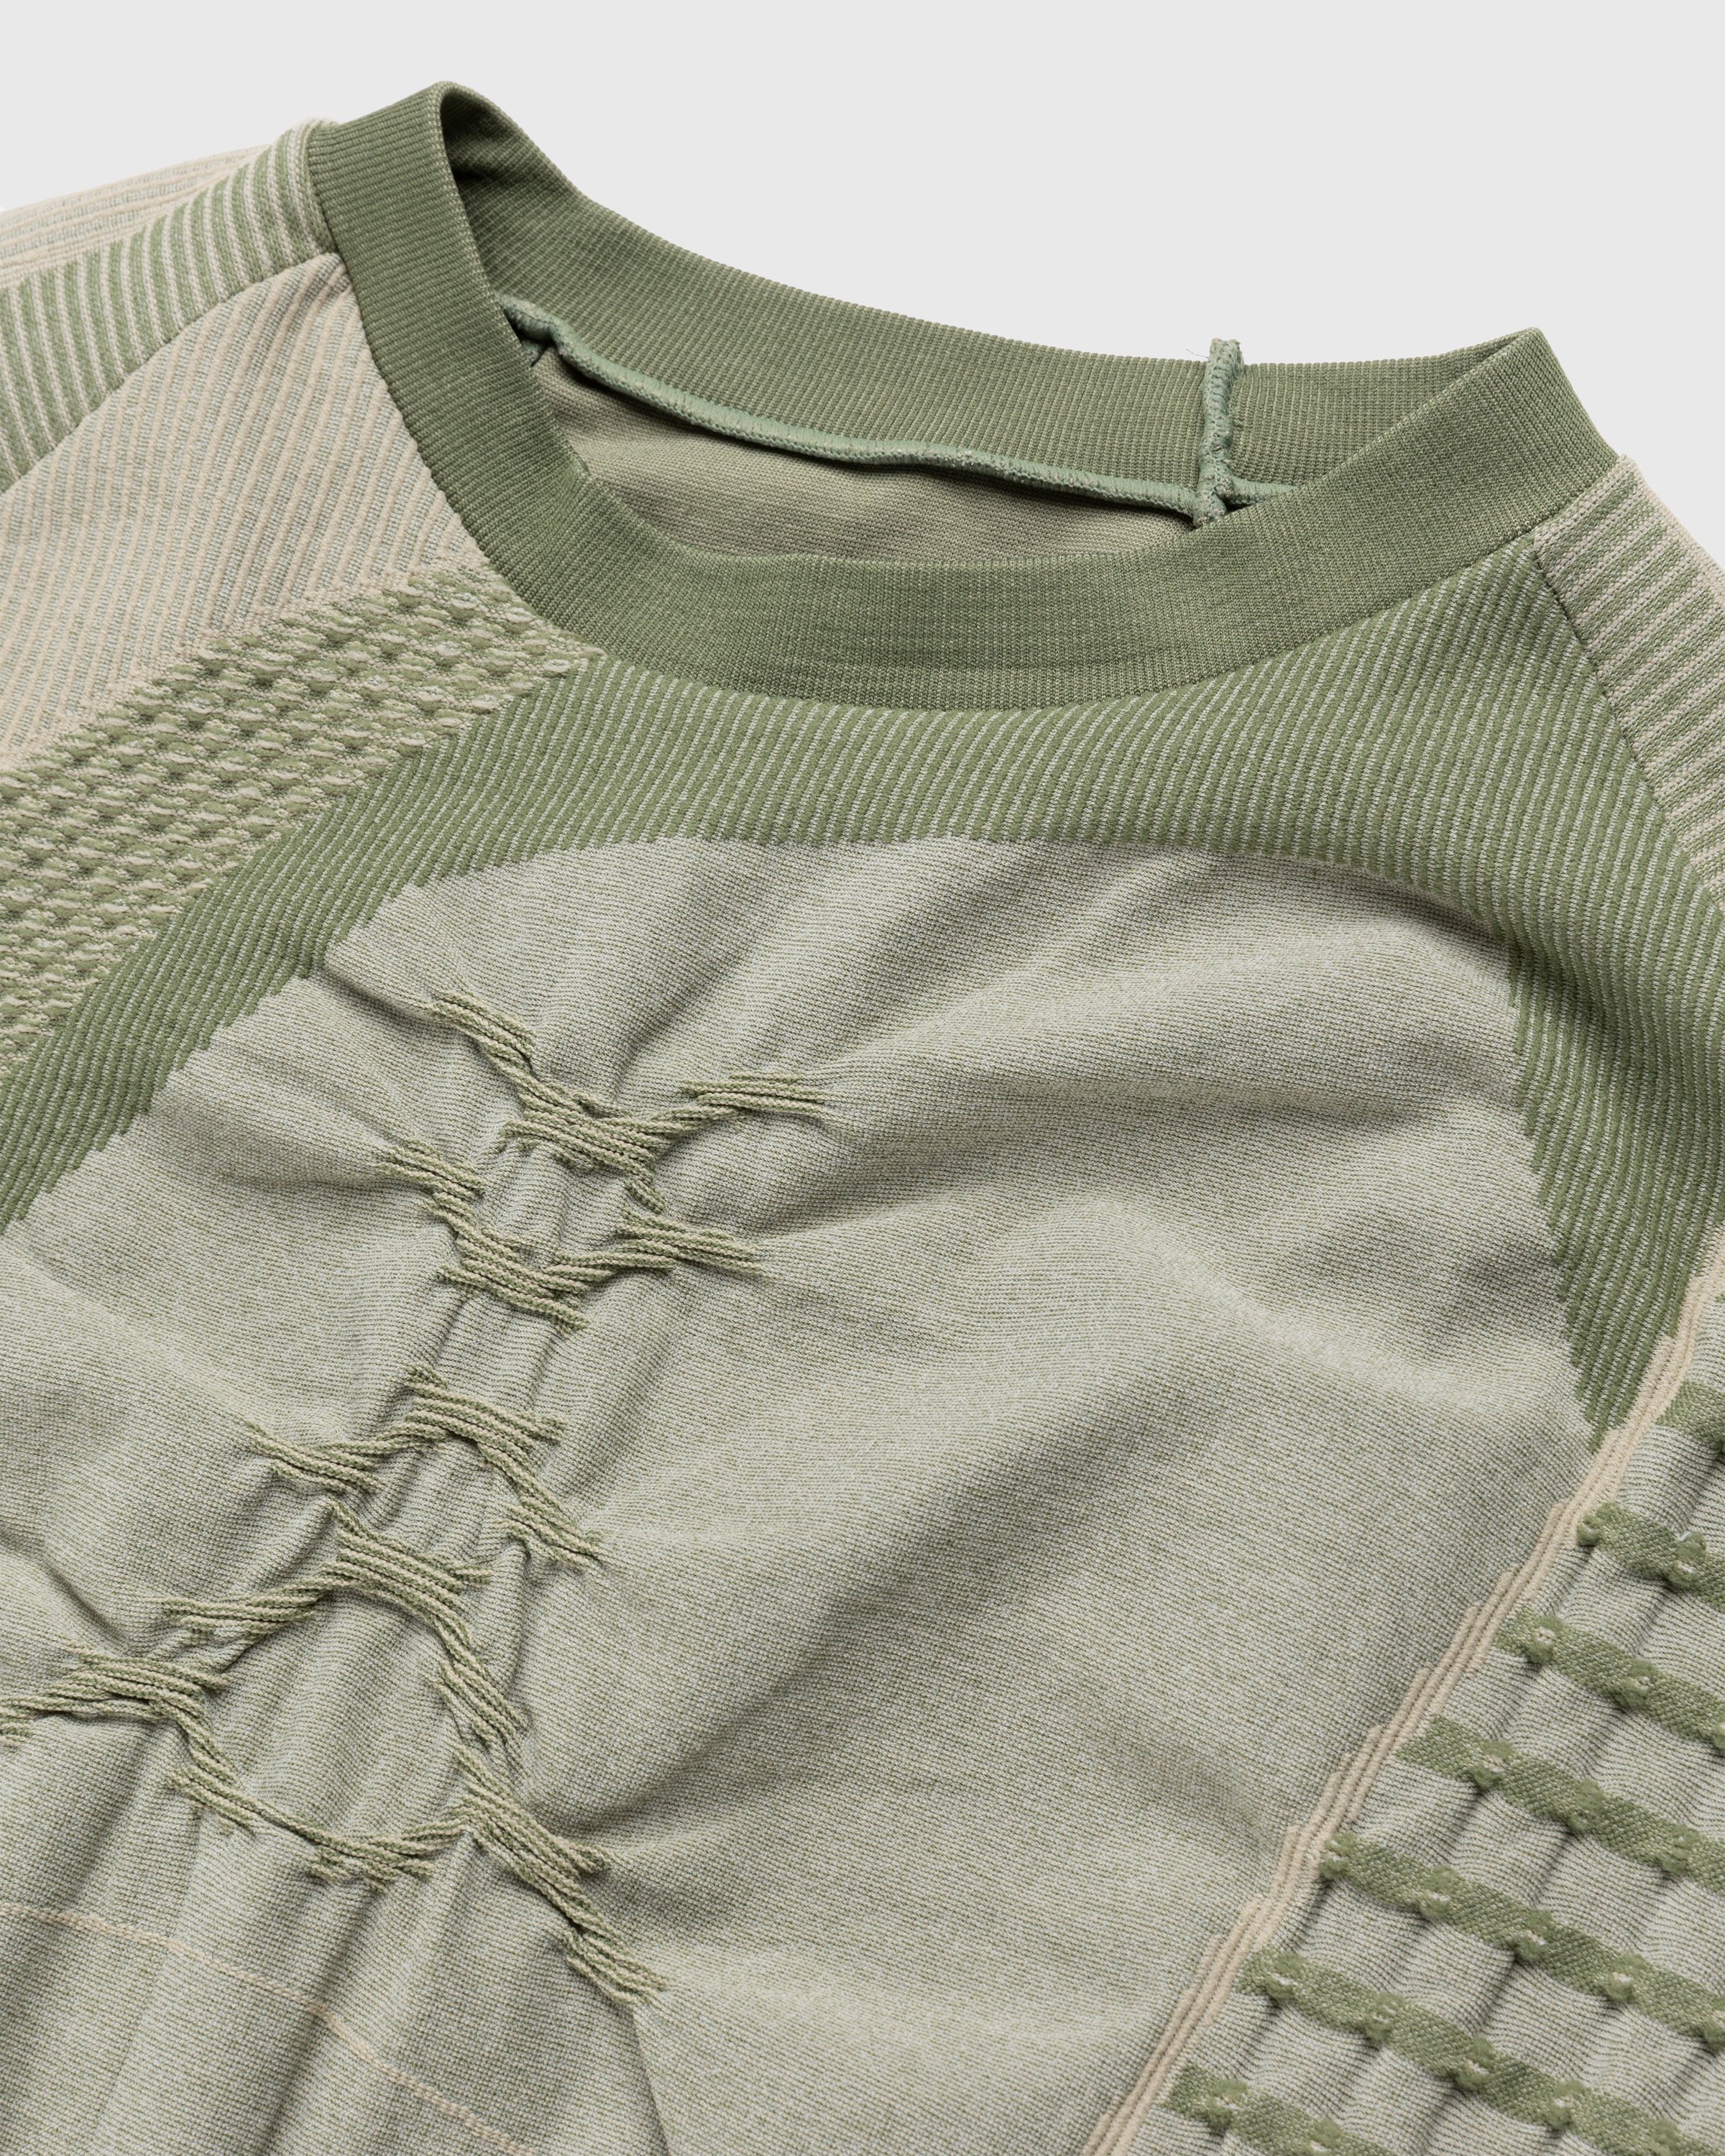 ROA - Tech Knit Olive - Clothing - Green - Image 3